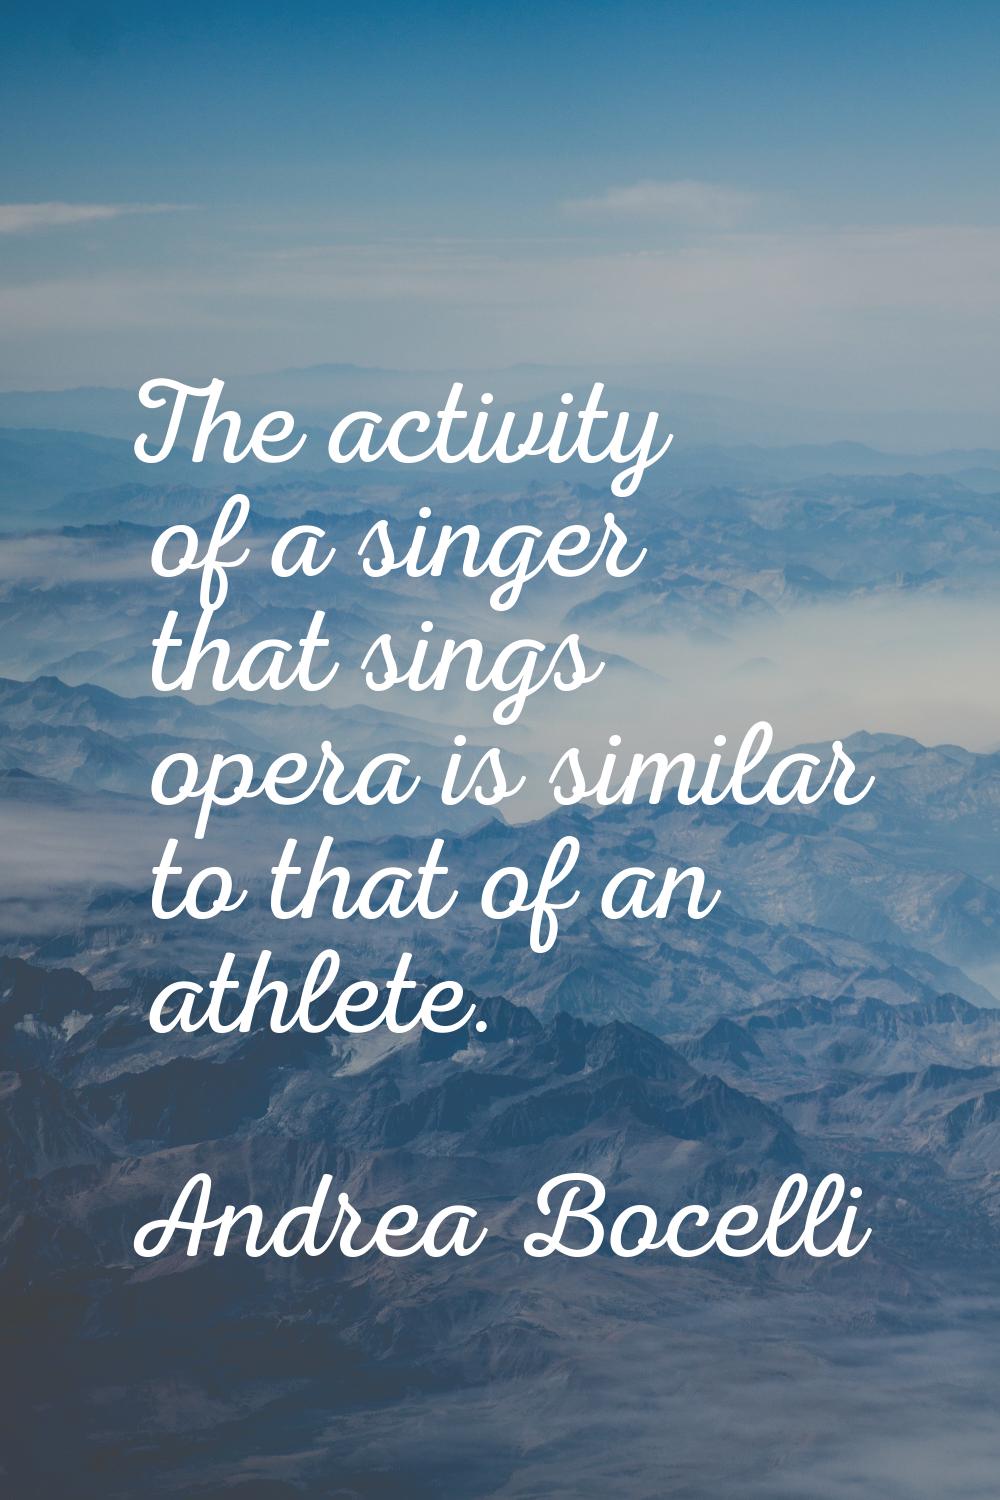 The activity of a singer that sings opera is similar to that of an athlete.